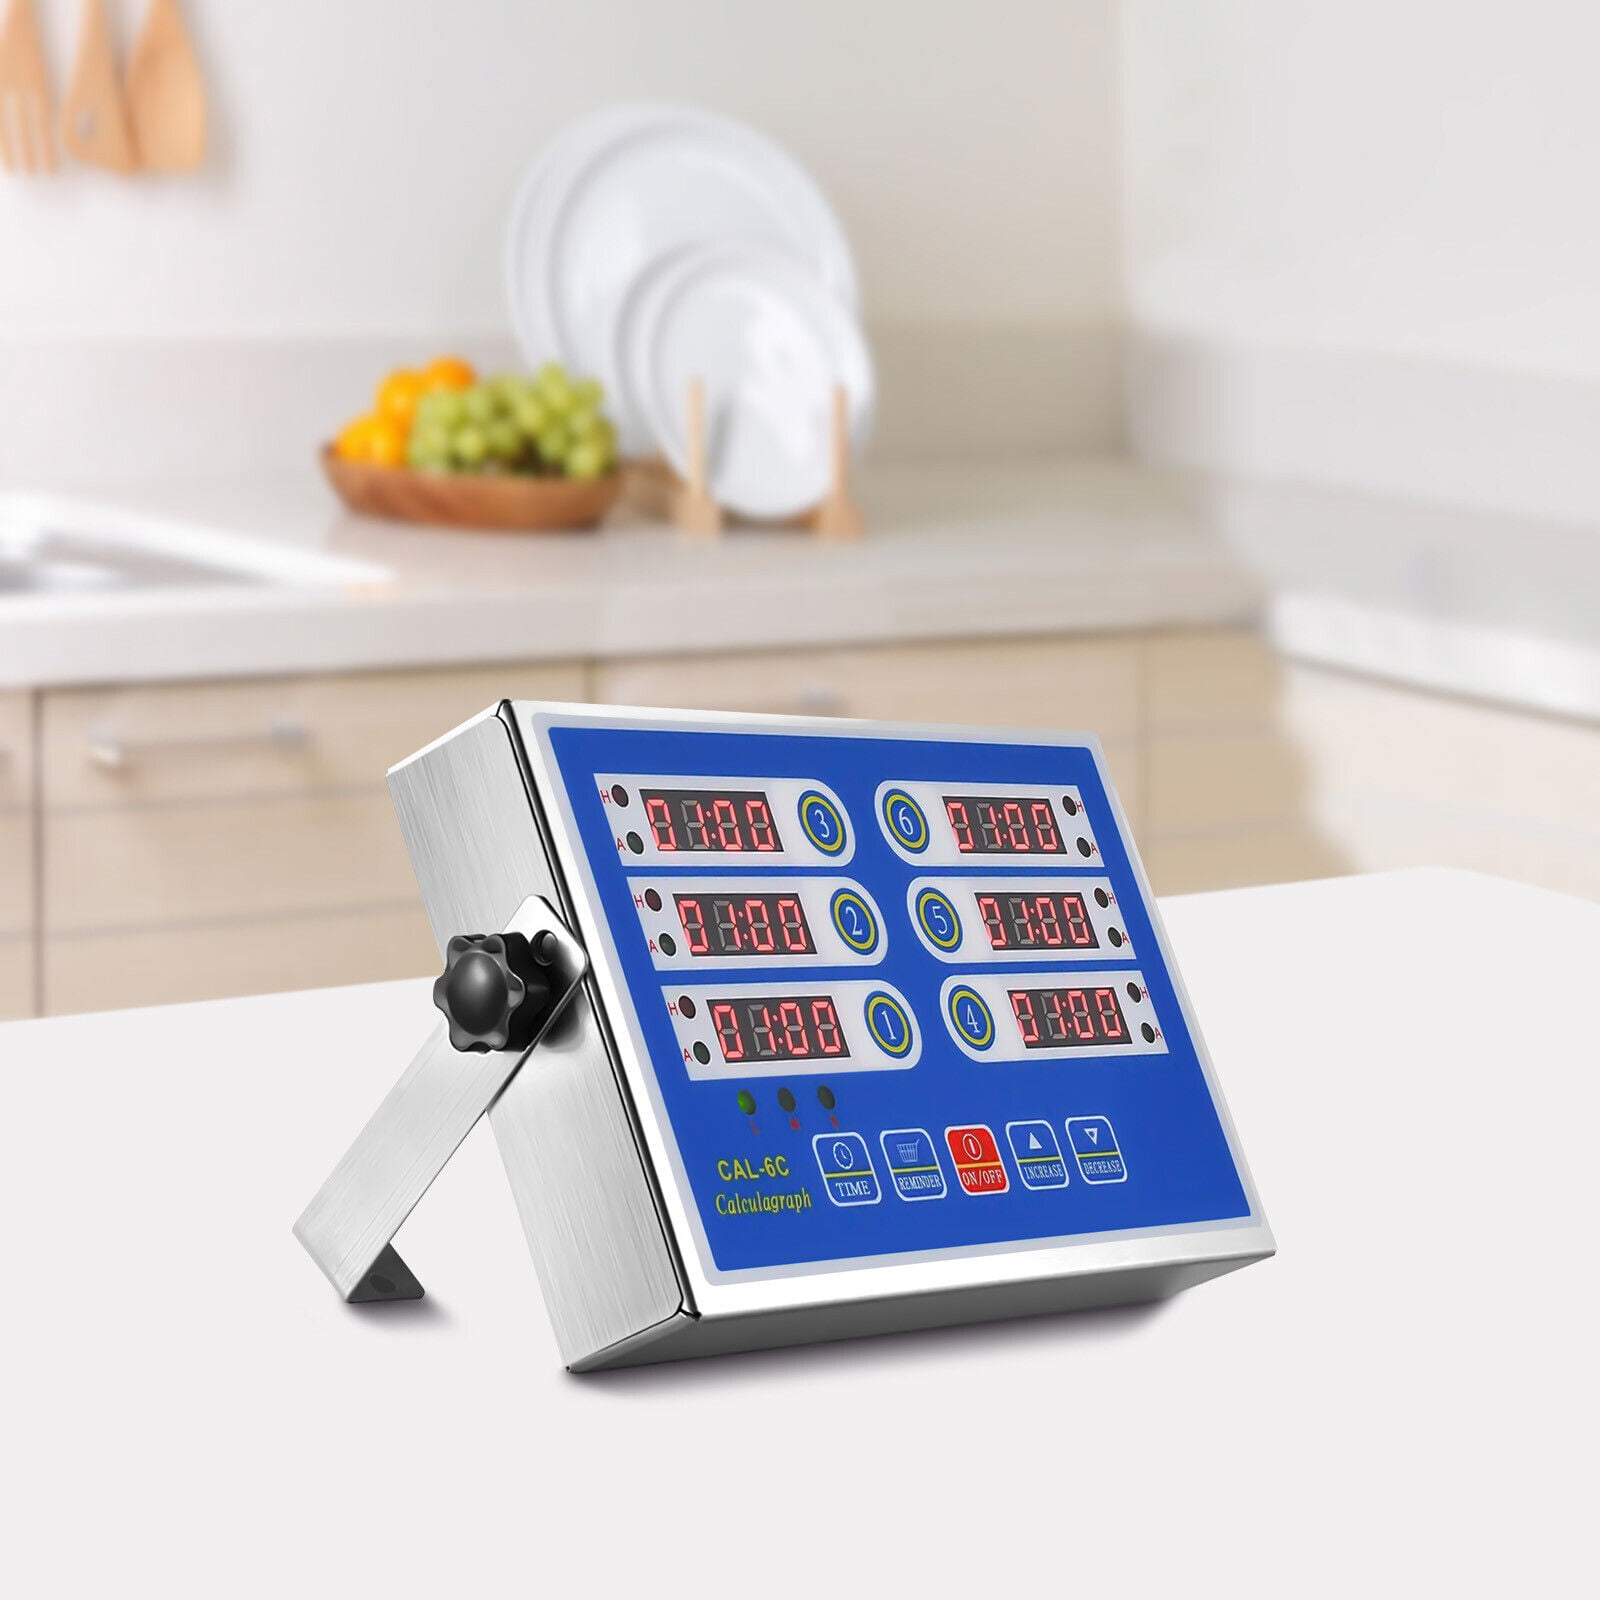 Timer for cooking food, 6 channel timer